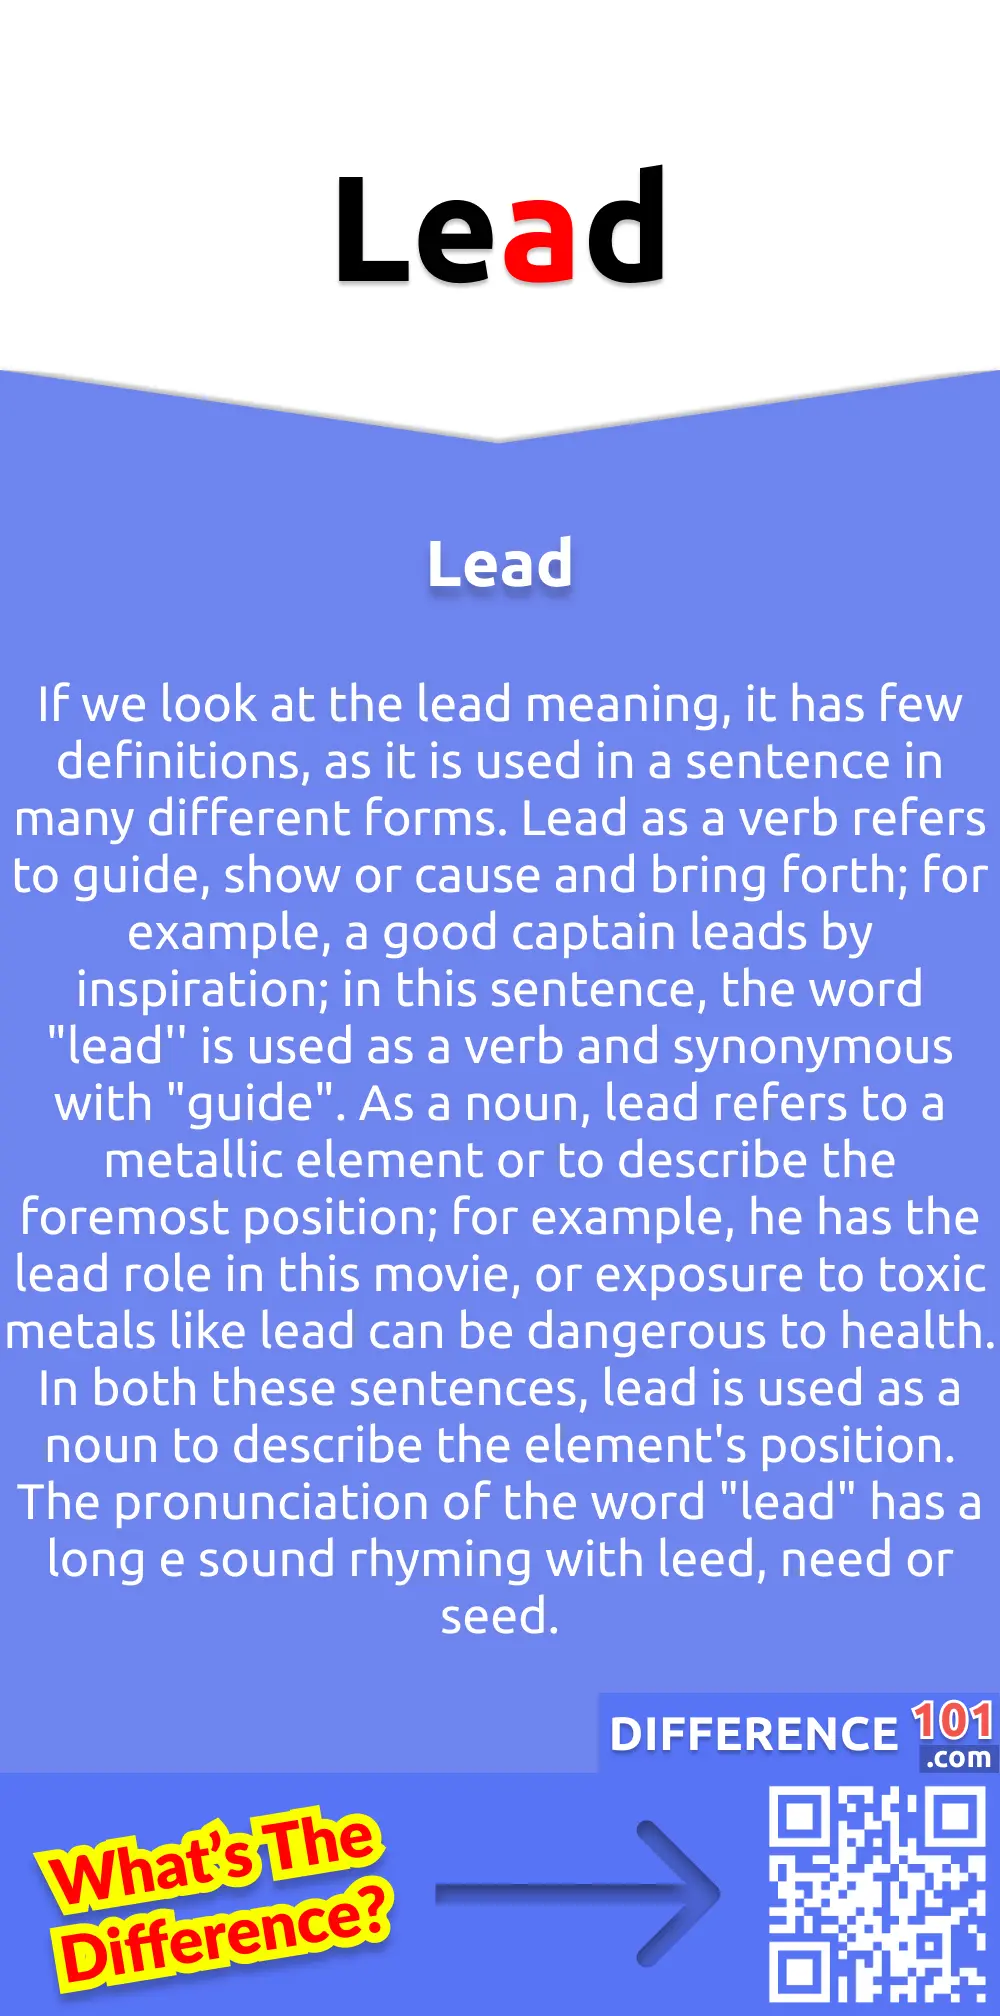 Led vs. Lead: 7 Key Differences, & Cons, Examples | Difference 101